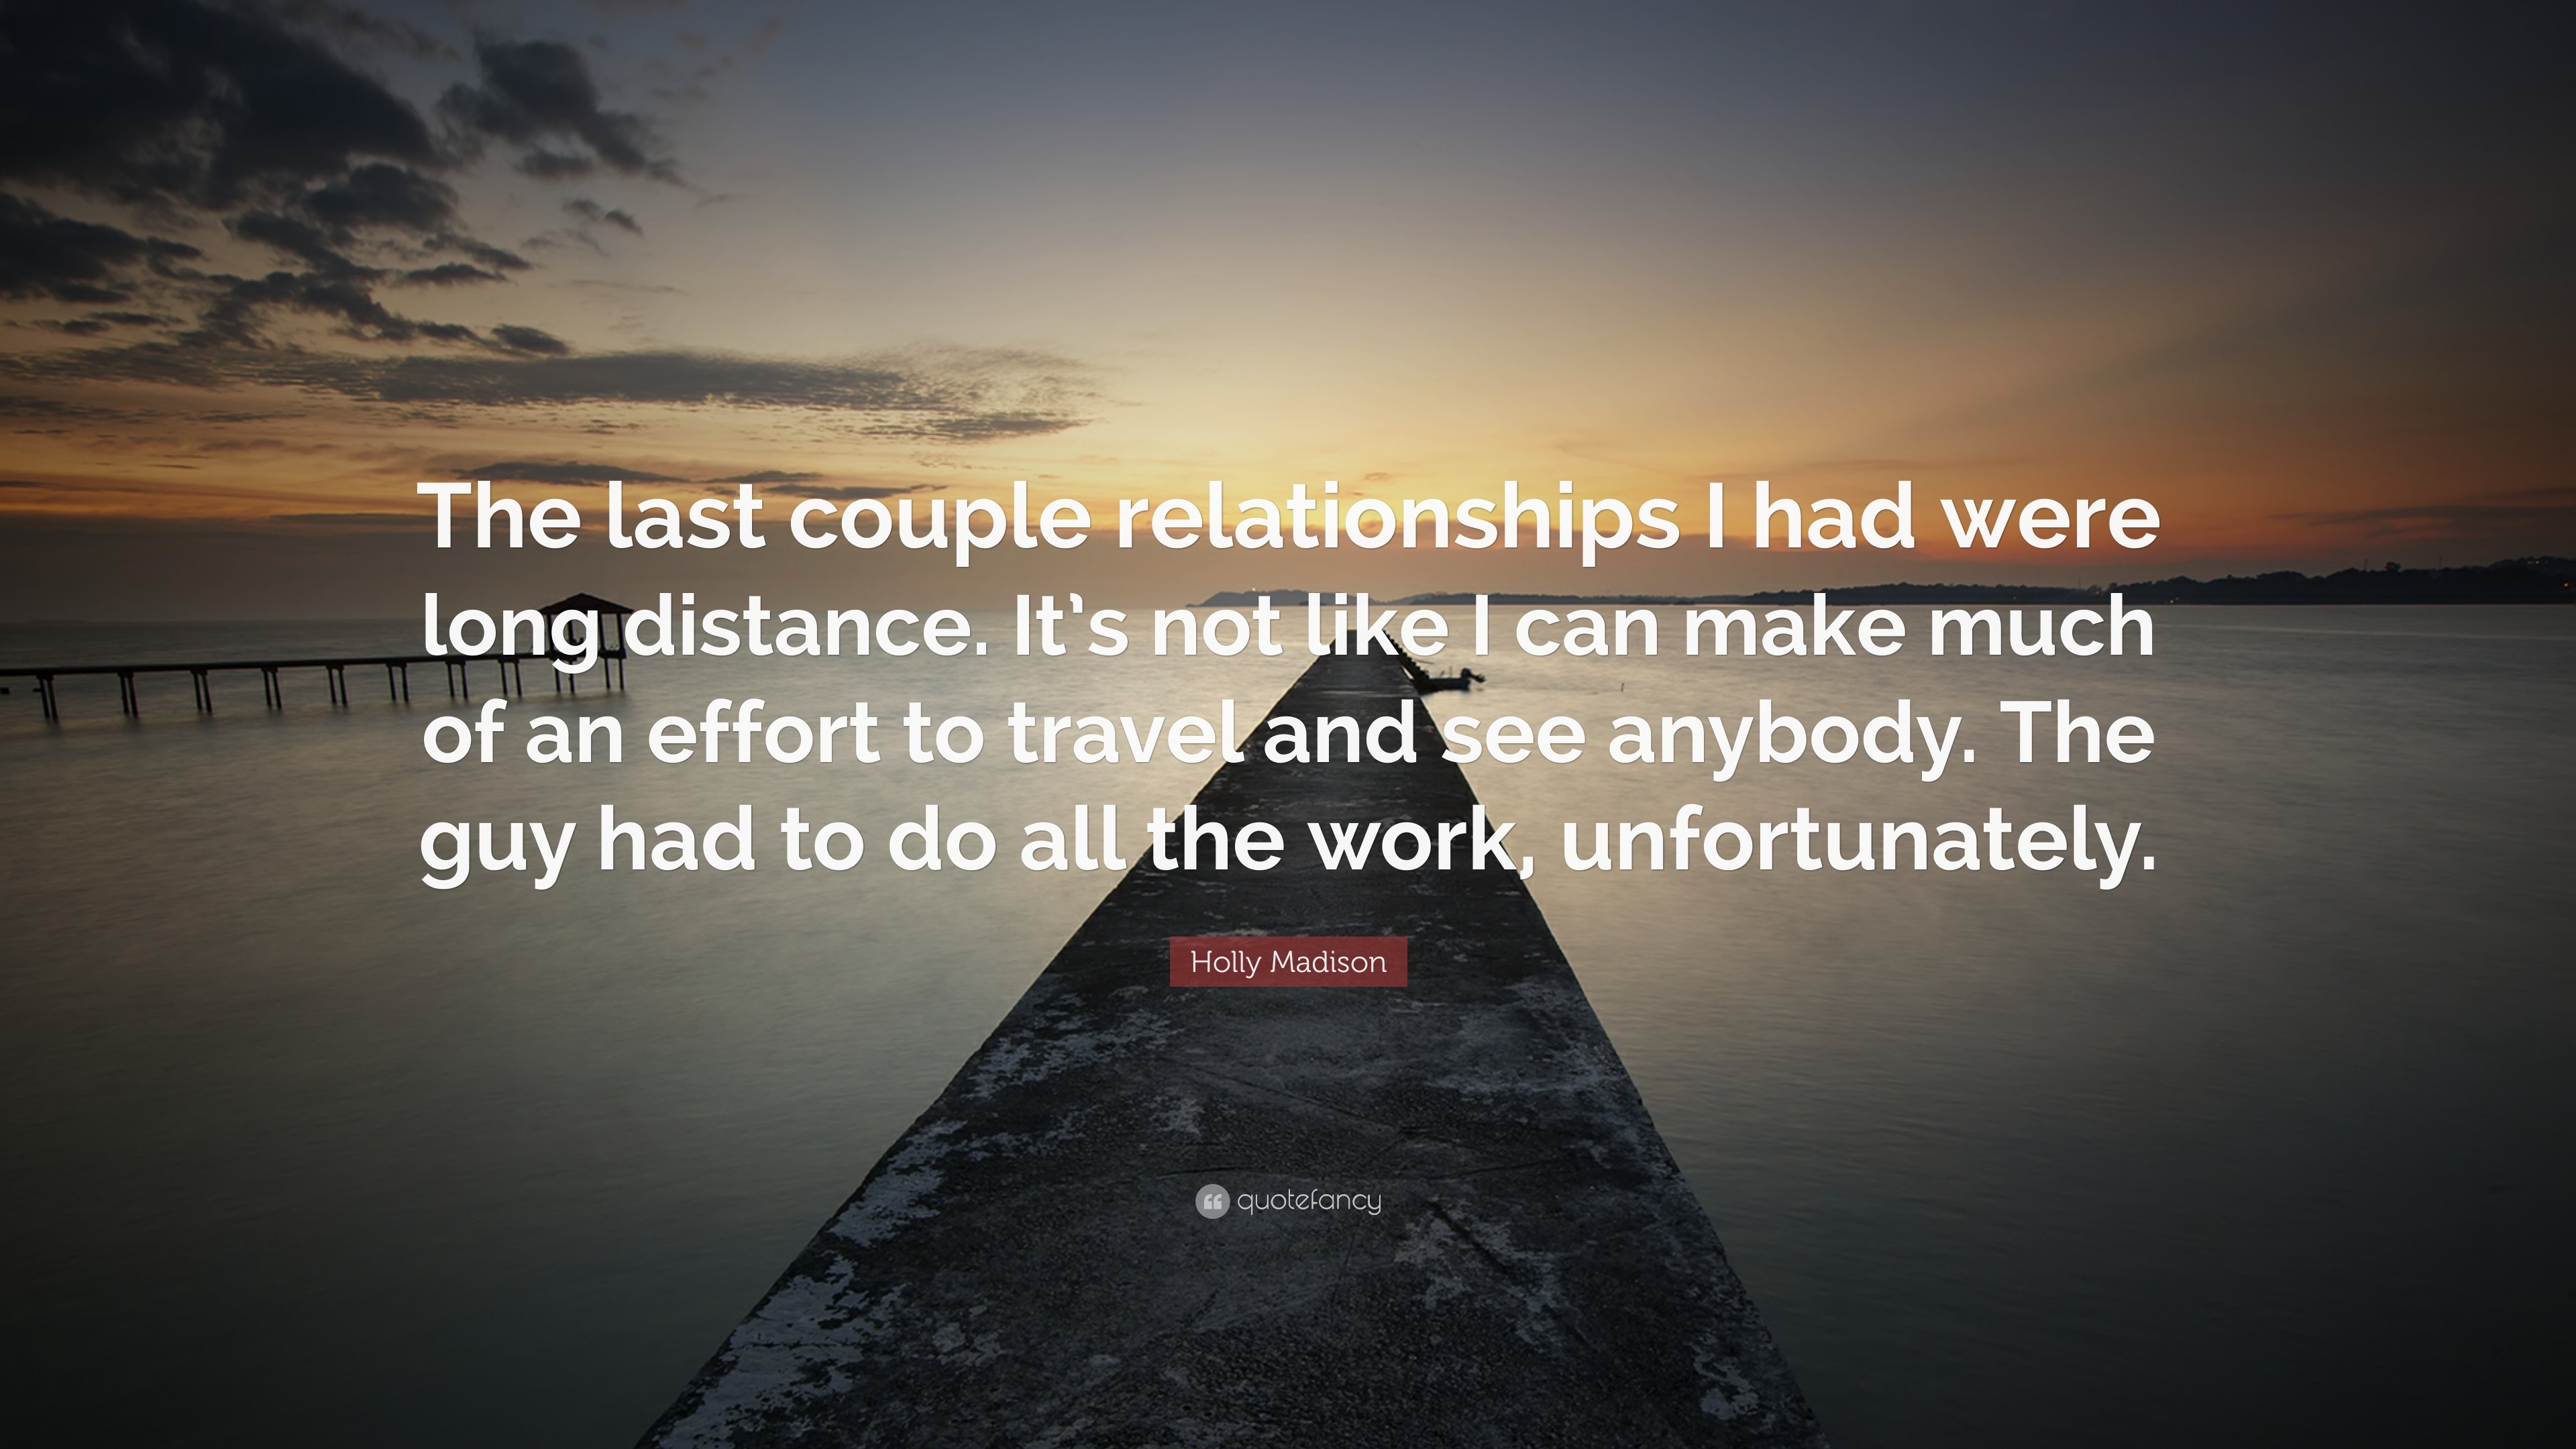 3840x2160 Holly Madison Quote: “The last couple relationships I had were long distance.  It's